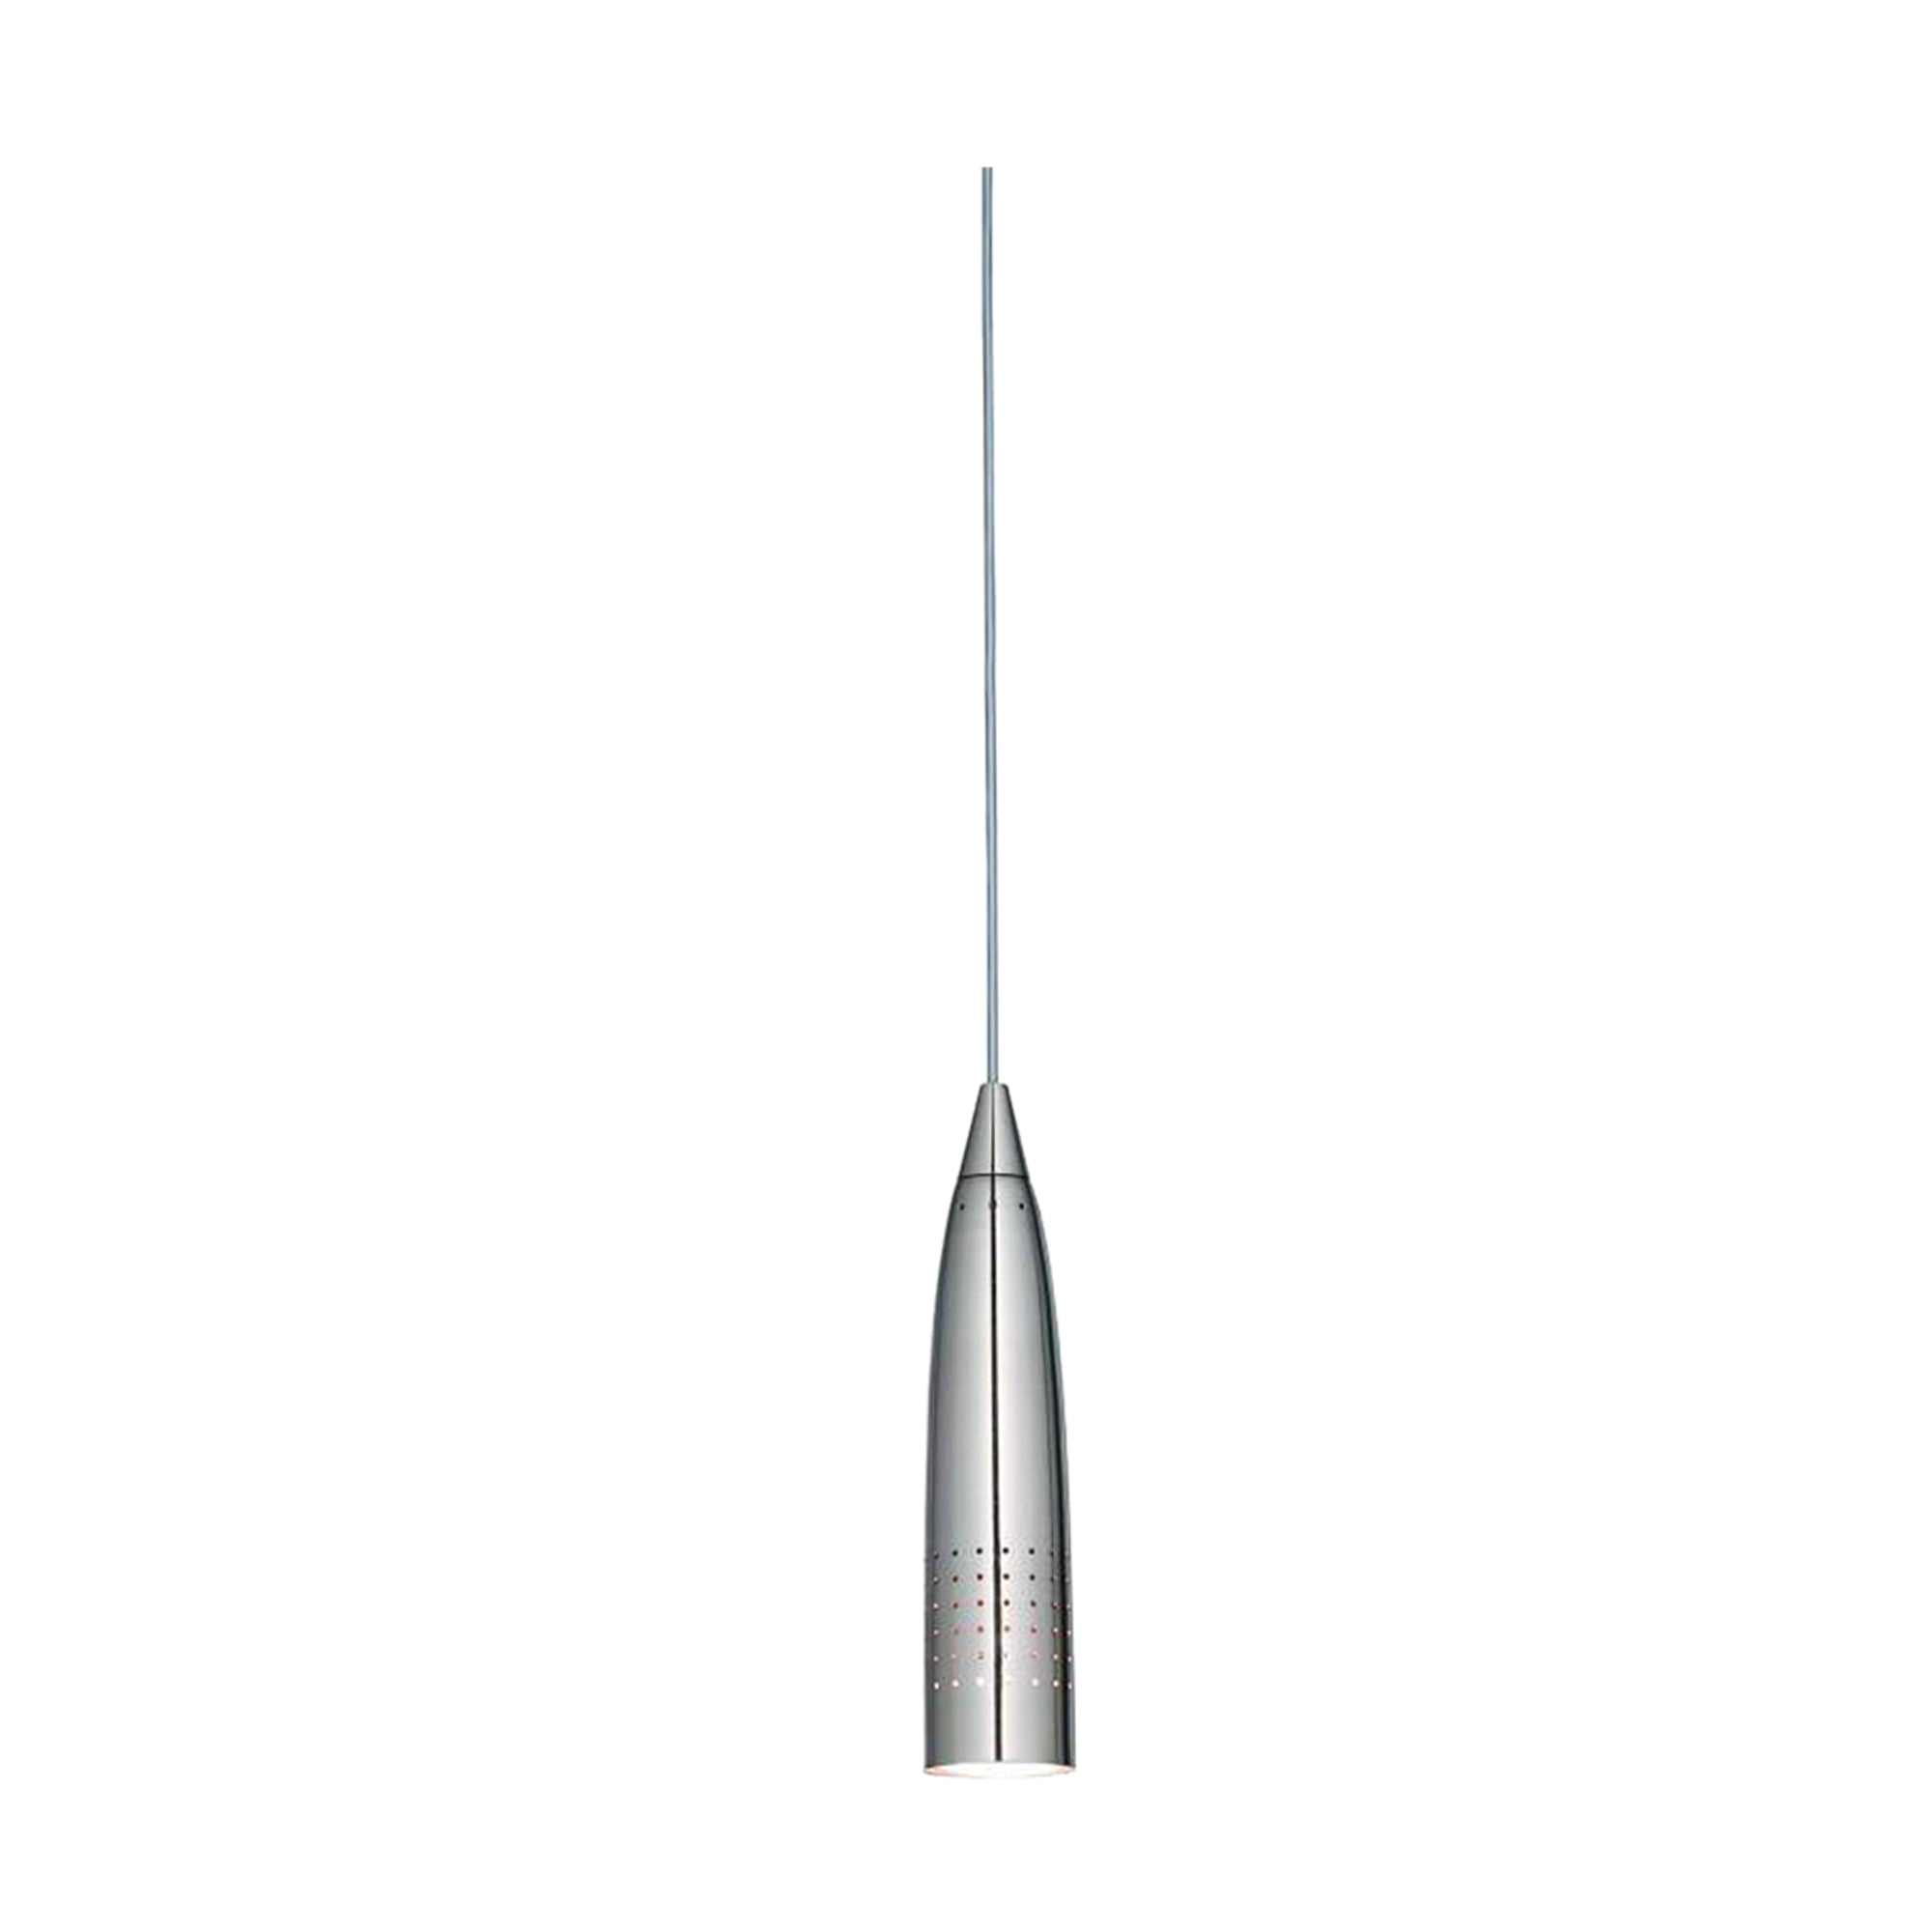 Access Lighting Inc, ACCESS LIGHTING ODYSSEY COLLECTION MINI PENDANT 52001-2-BS FIXTURE BRUSHED STEEL